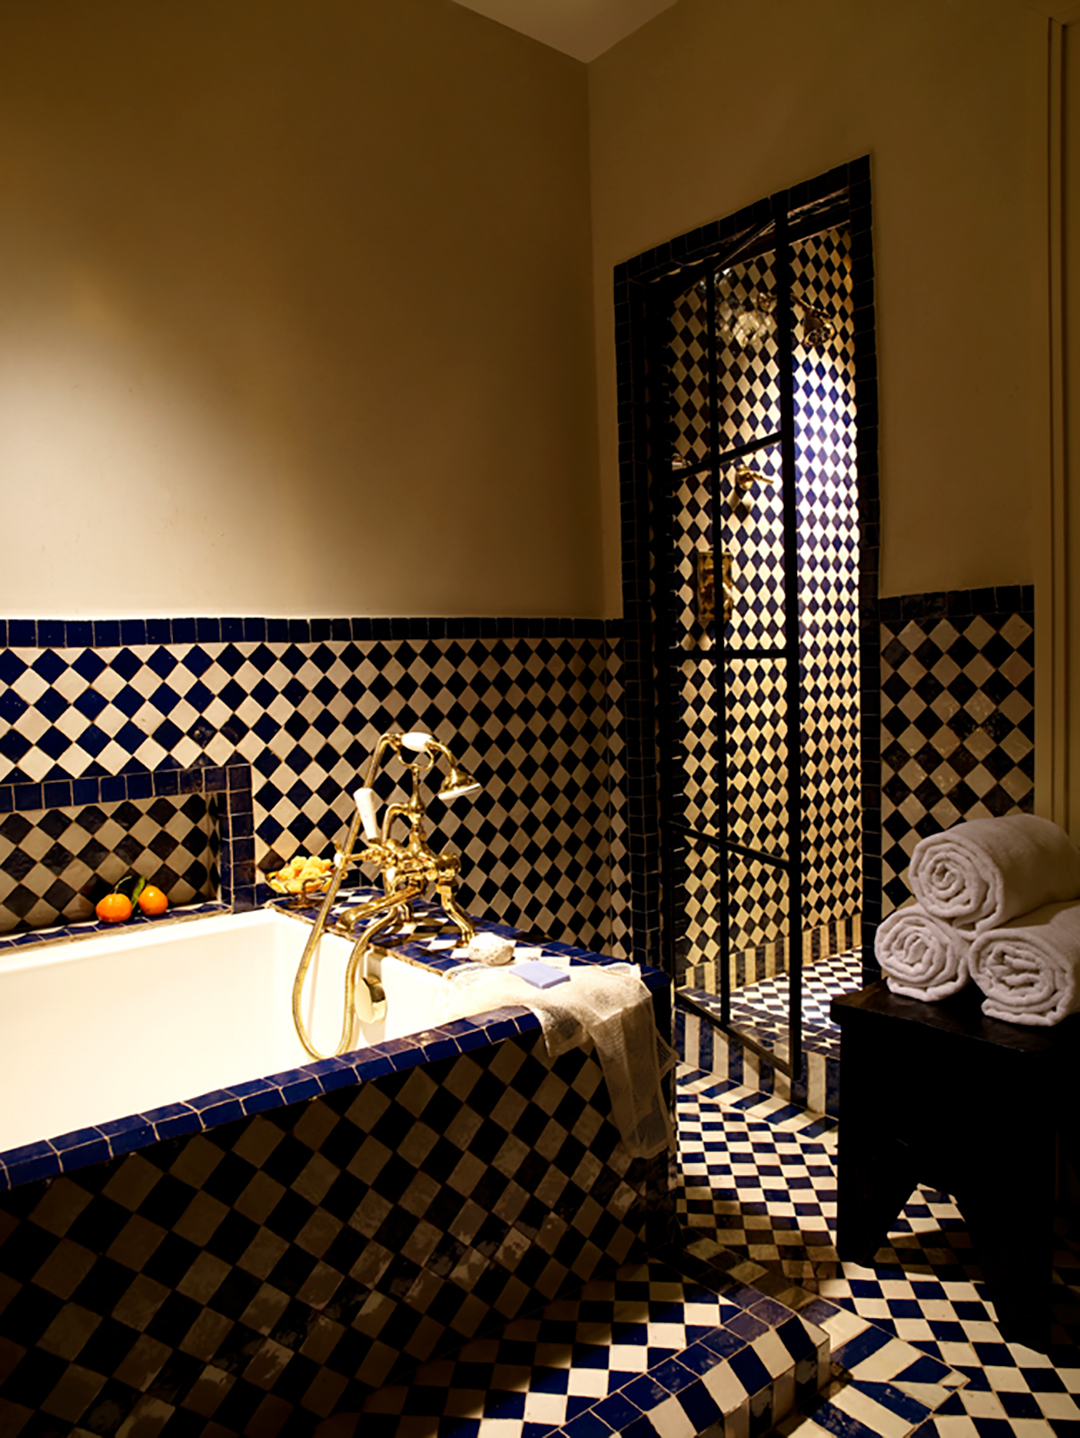 The Greenwich Hotel - Blue Moroccan Tile Bathroom and Soaking Tub